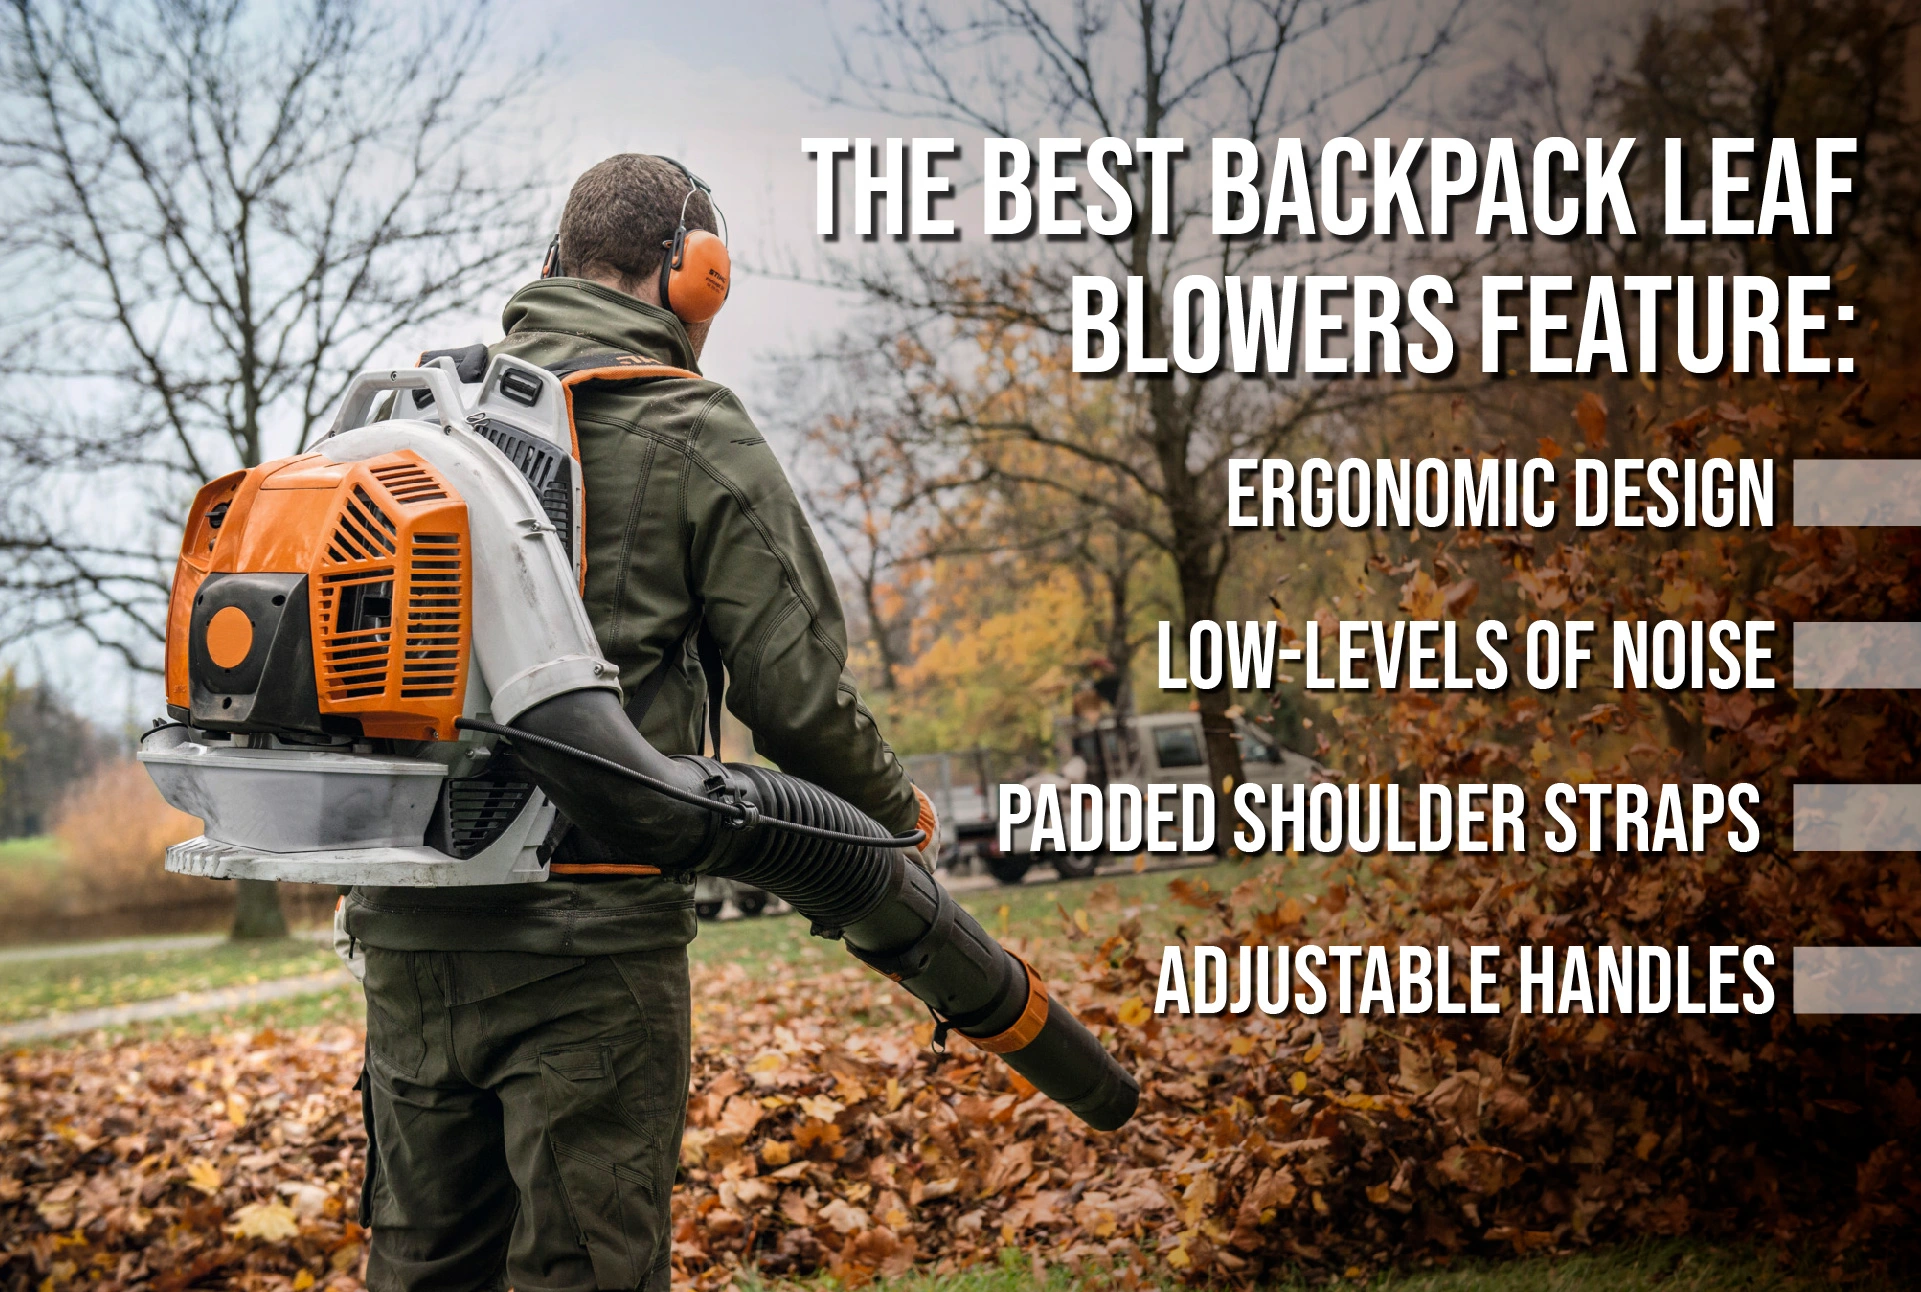 An infographic on the characteristics of the best backpack leaf blowers